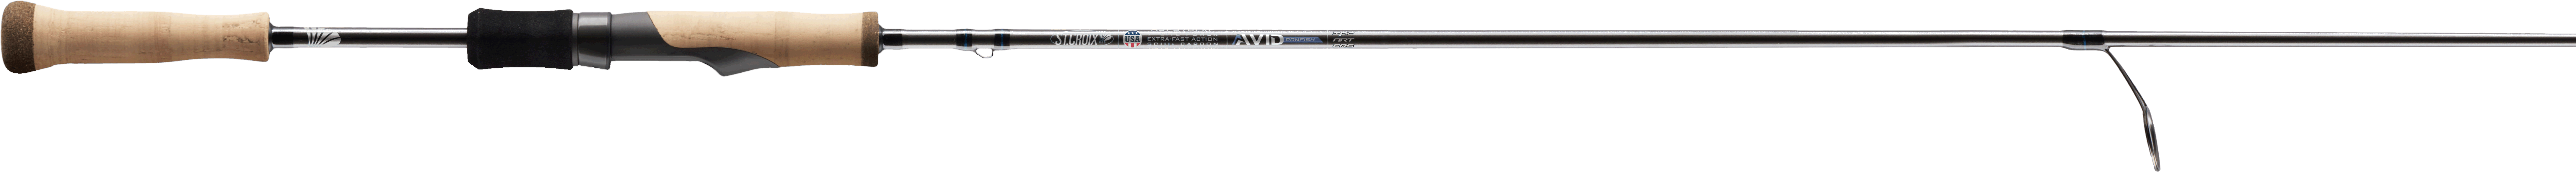 The St. Croix Advid Panfish 7'0